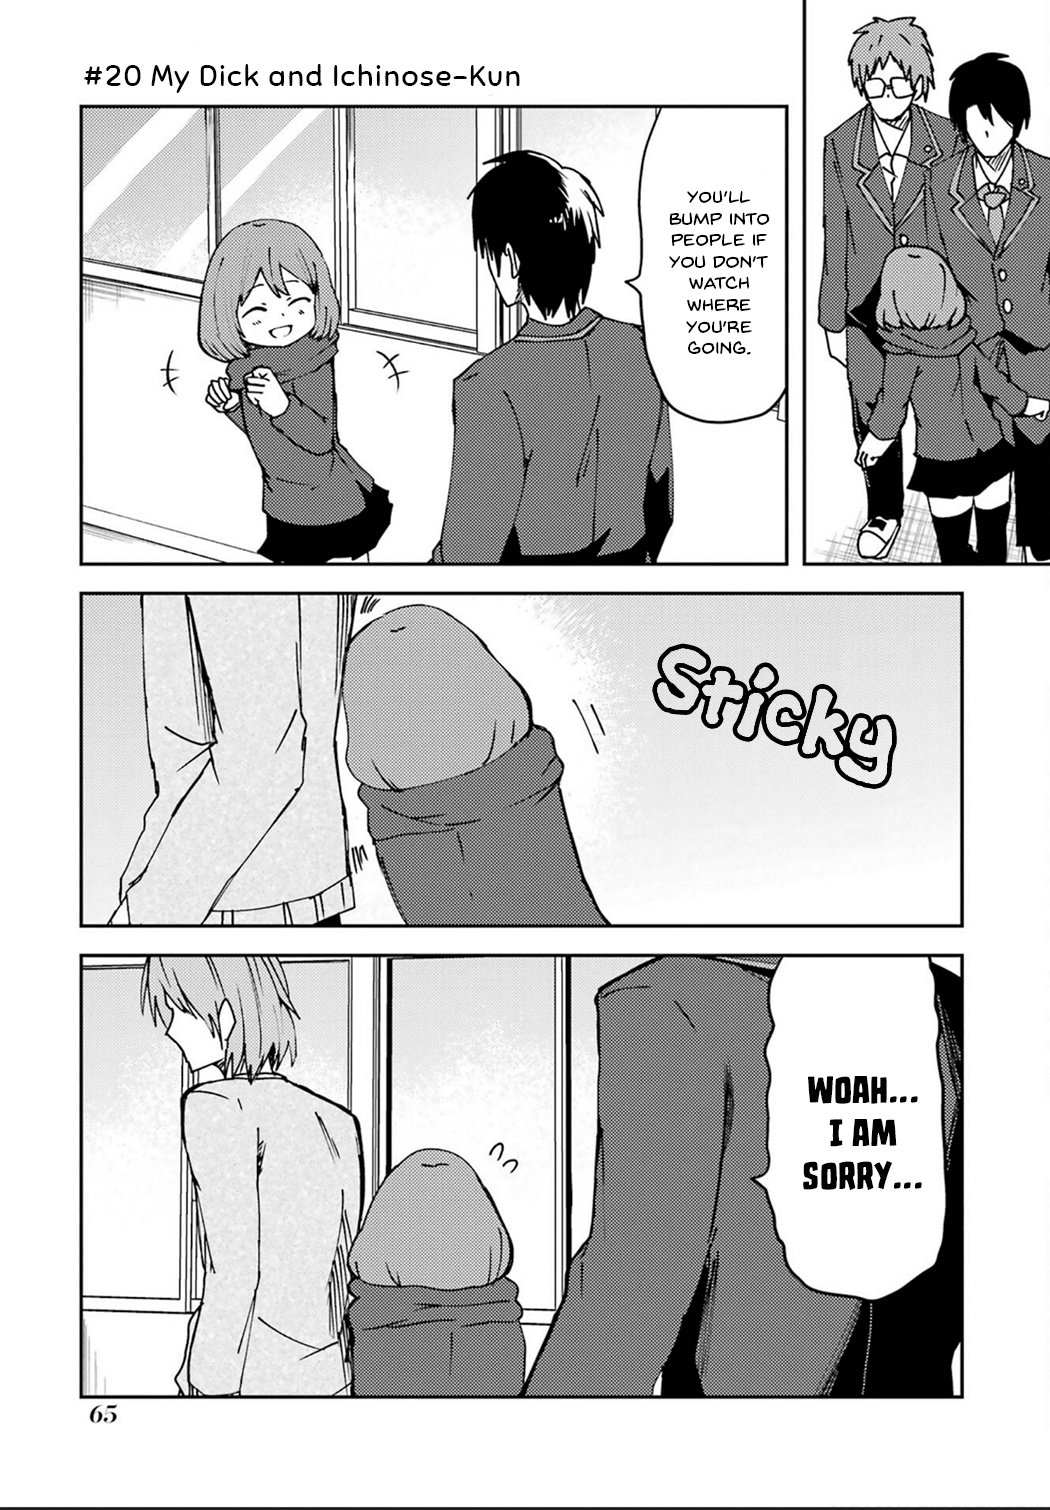 Turns Out My Dick Was A Cute Girl Vol.2 Chapter 20: My Dick And Ichinose-Kun - Picture 1